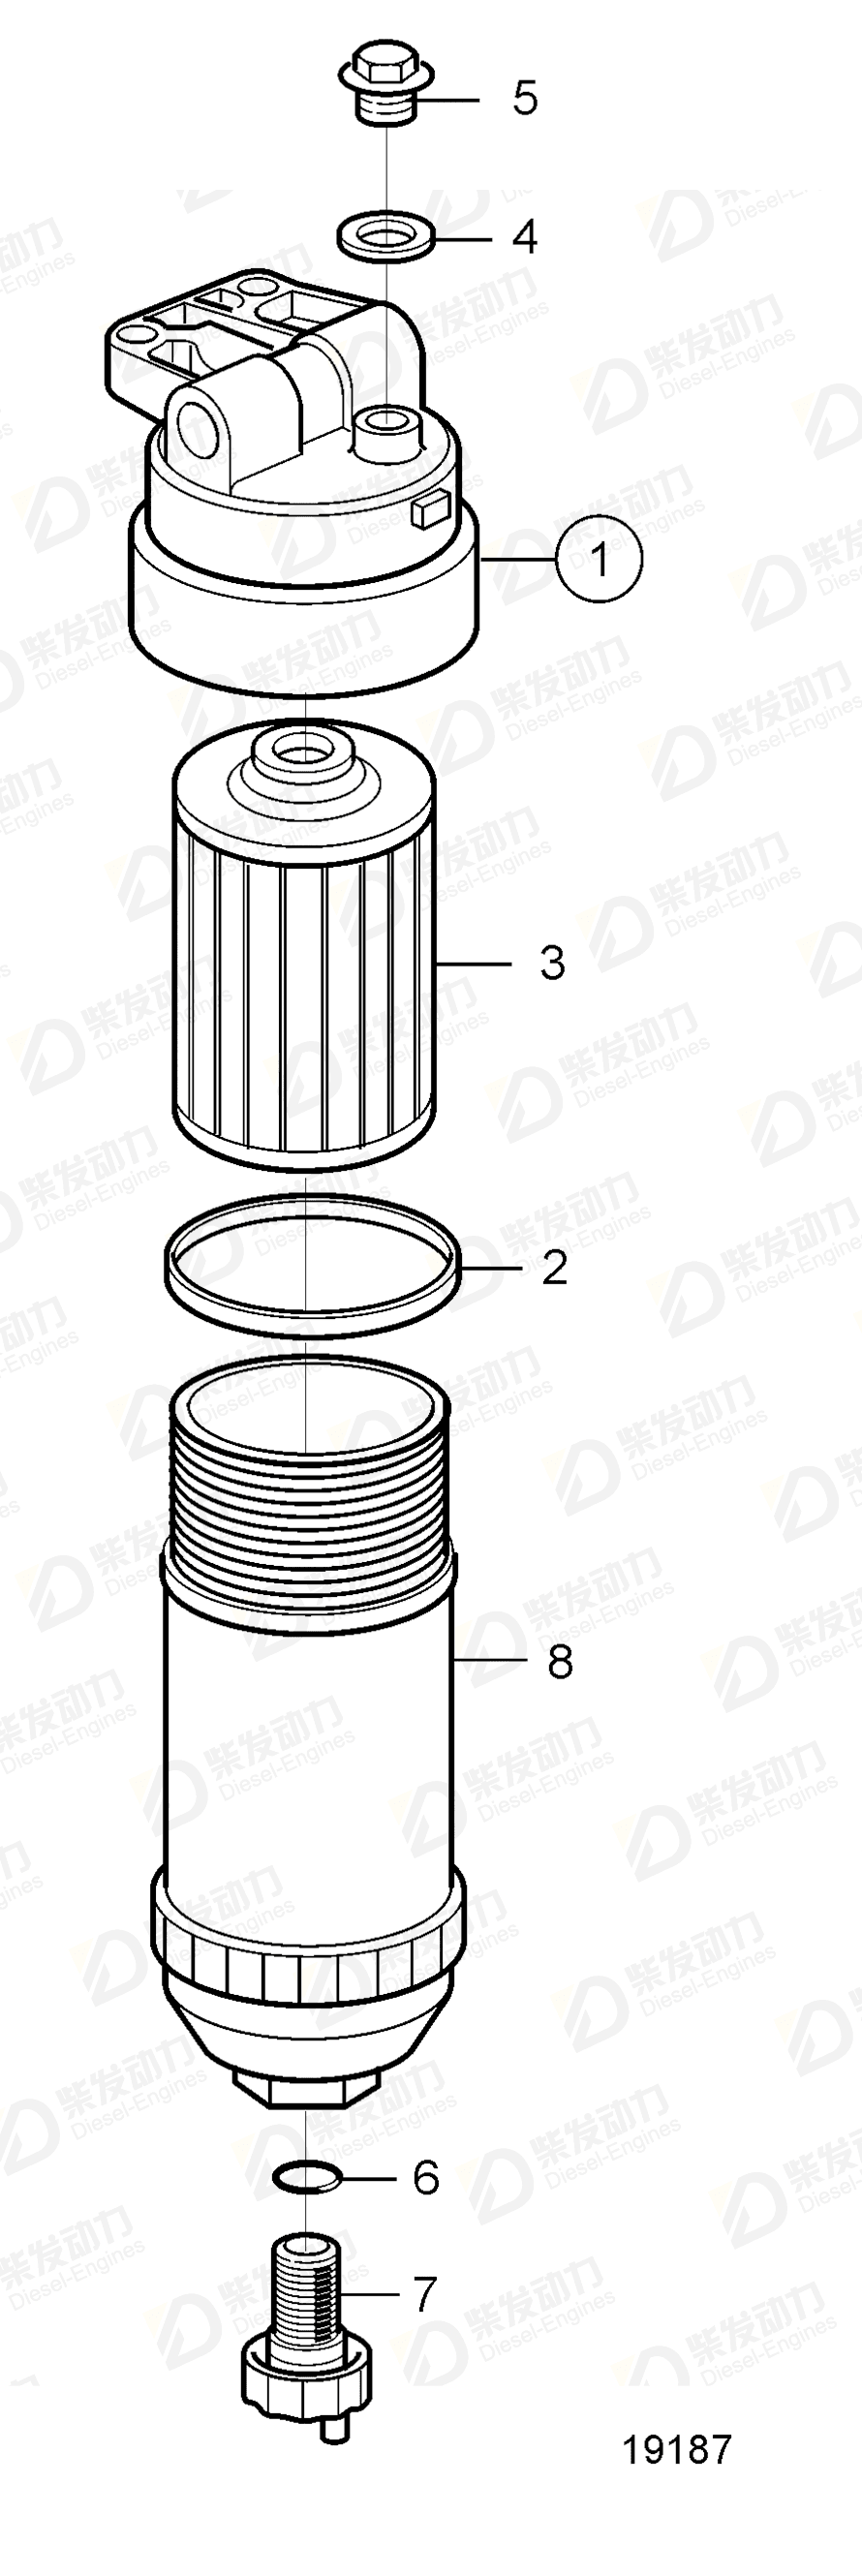 VOLVO Fuel filter 21408356 Drawing